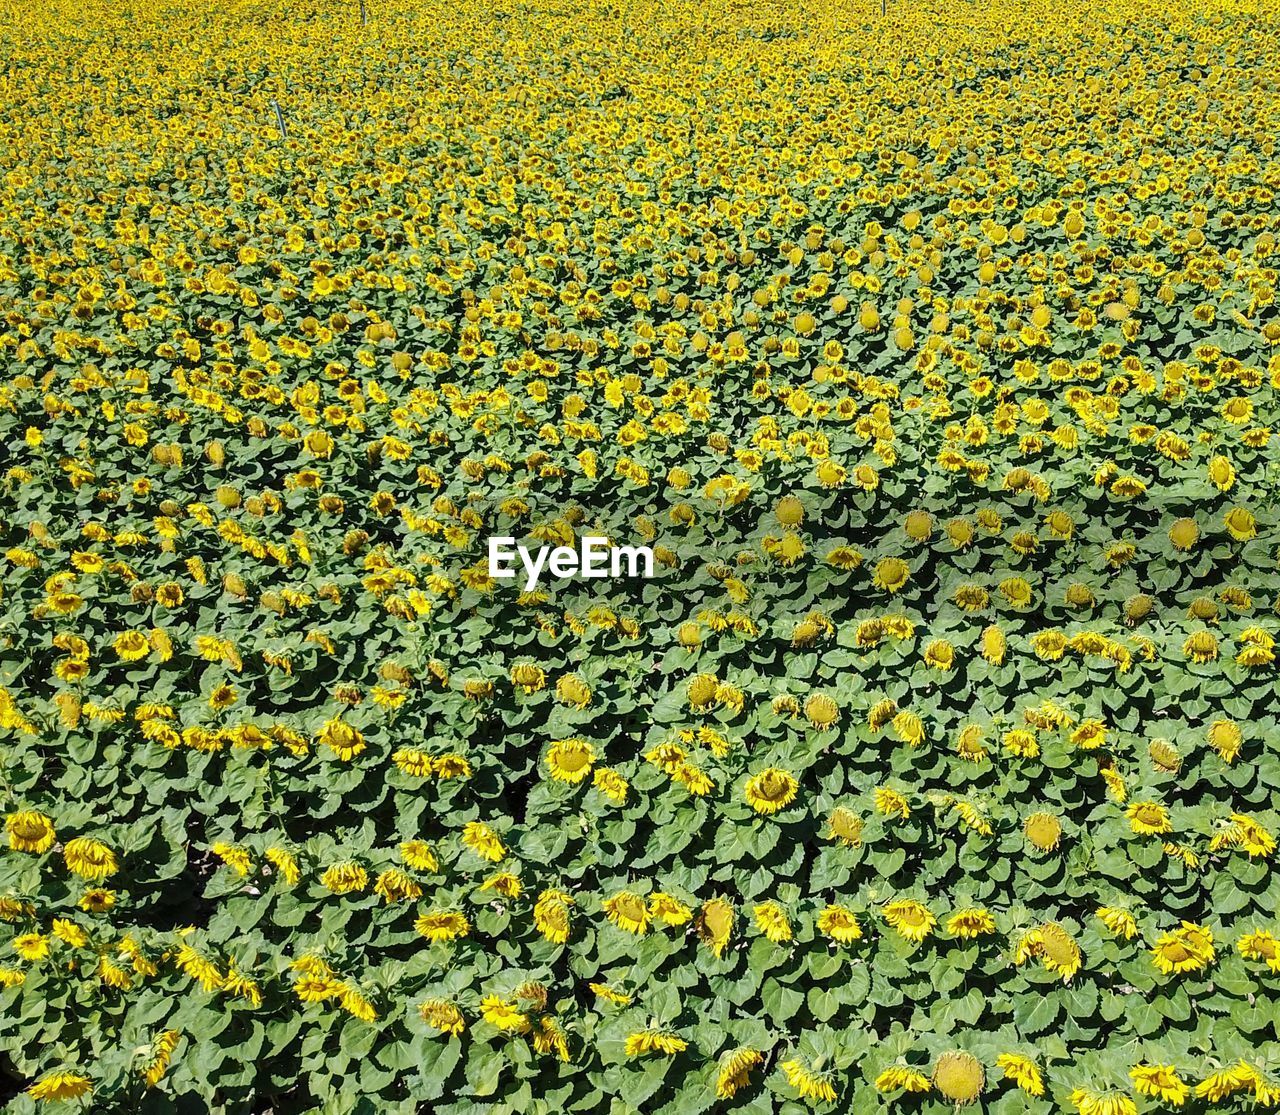 HIGH ANGLE VIEW OF YELLOW FLOWERING PLANTS ON LAND